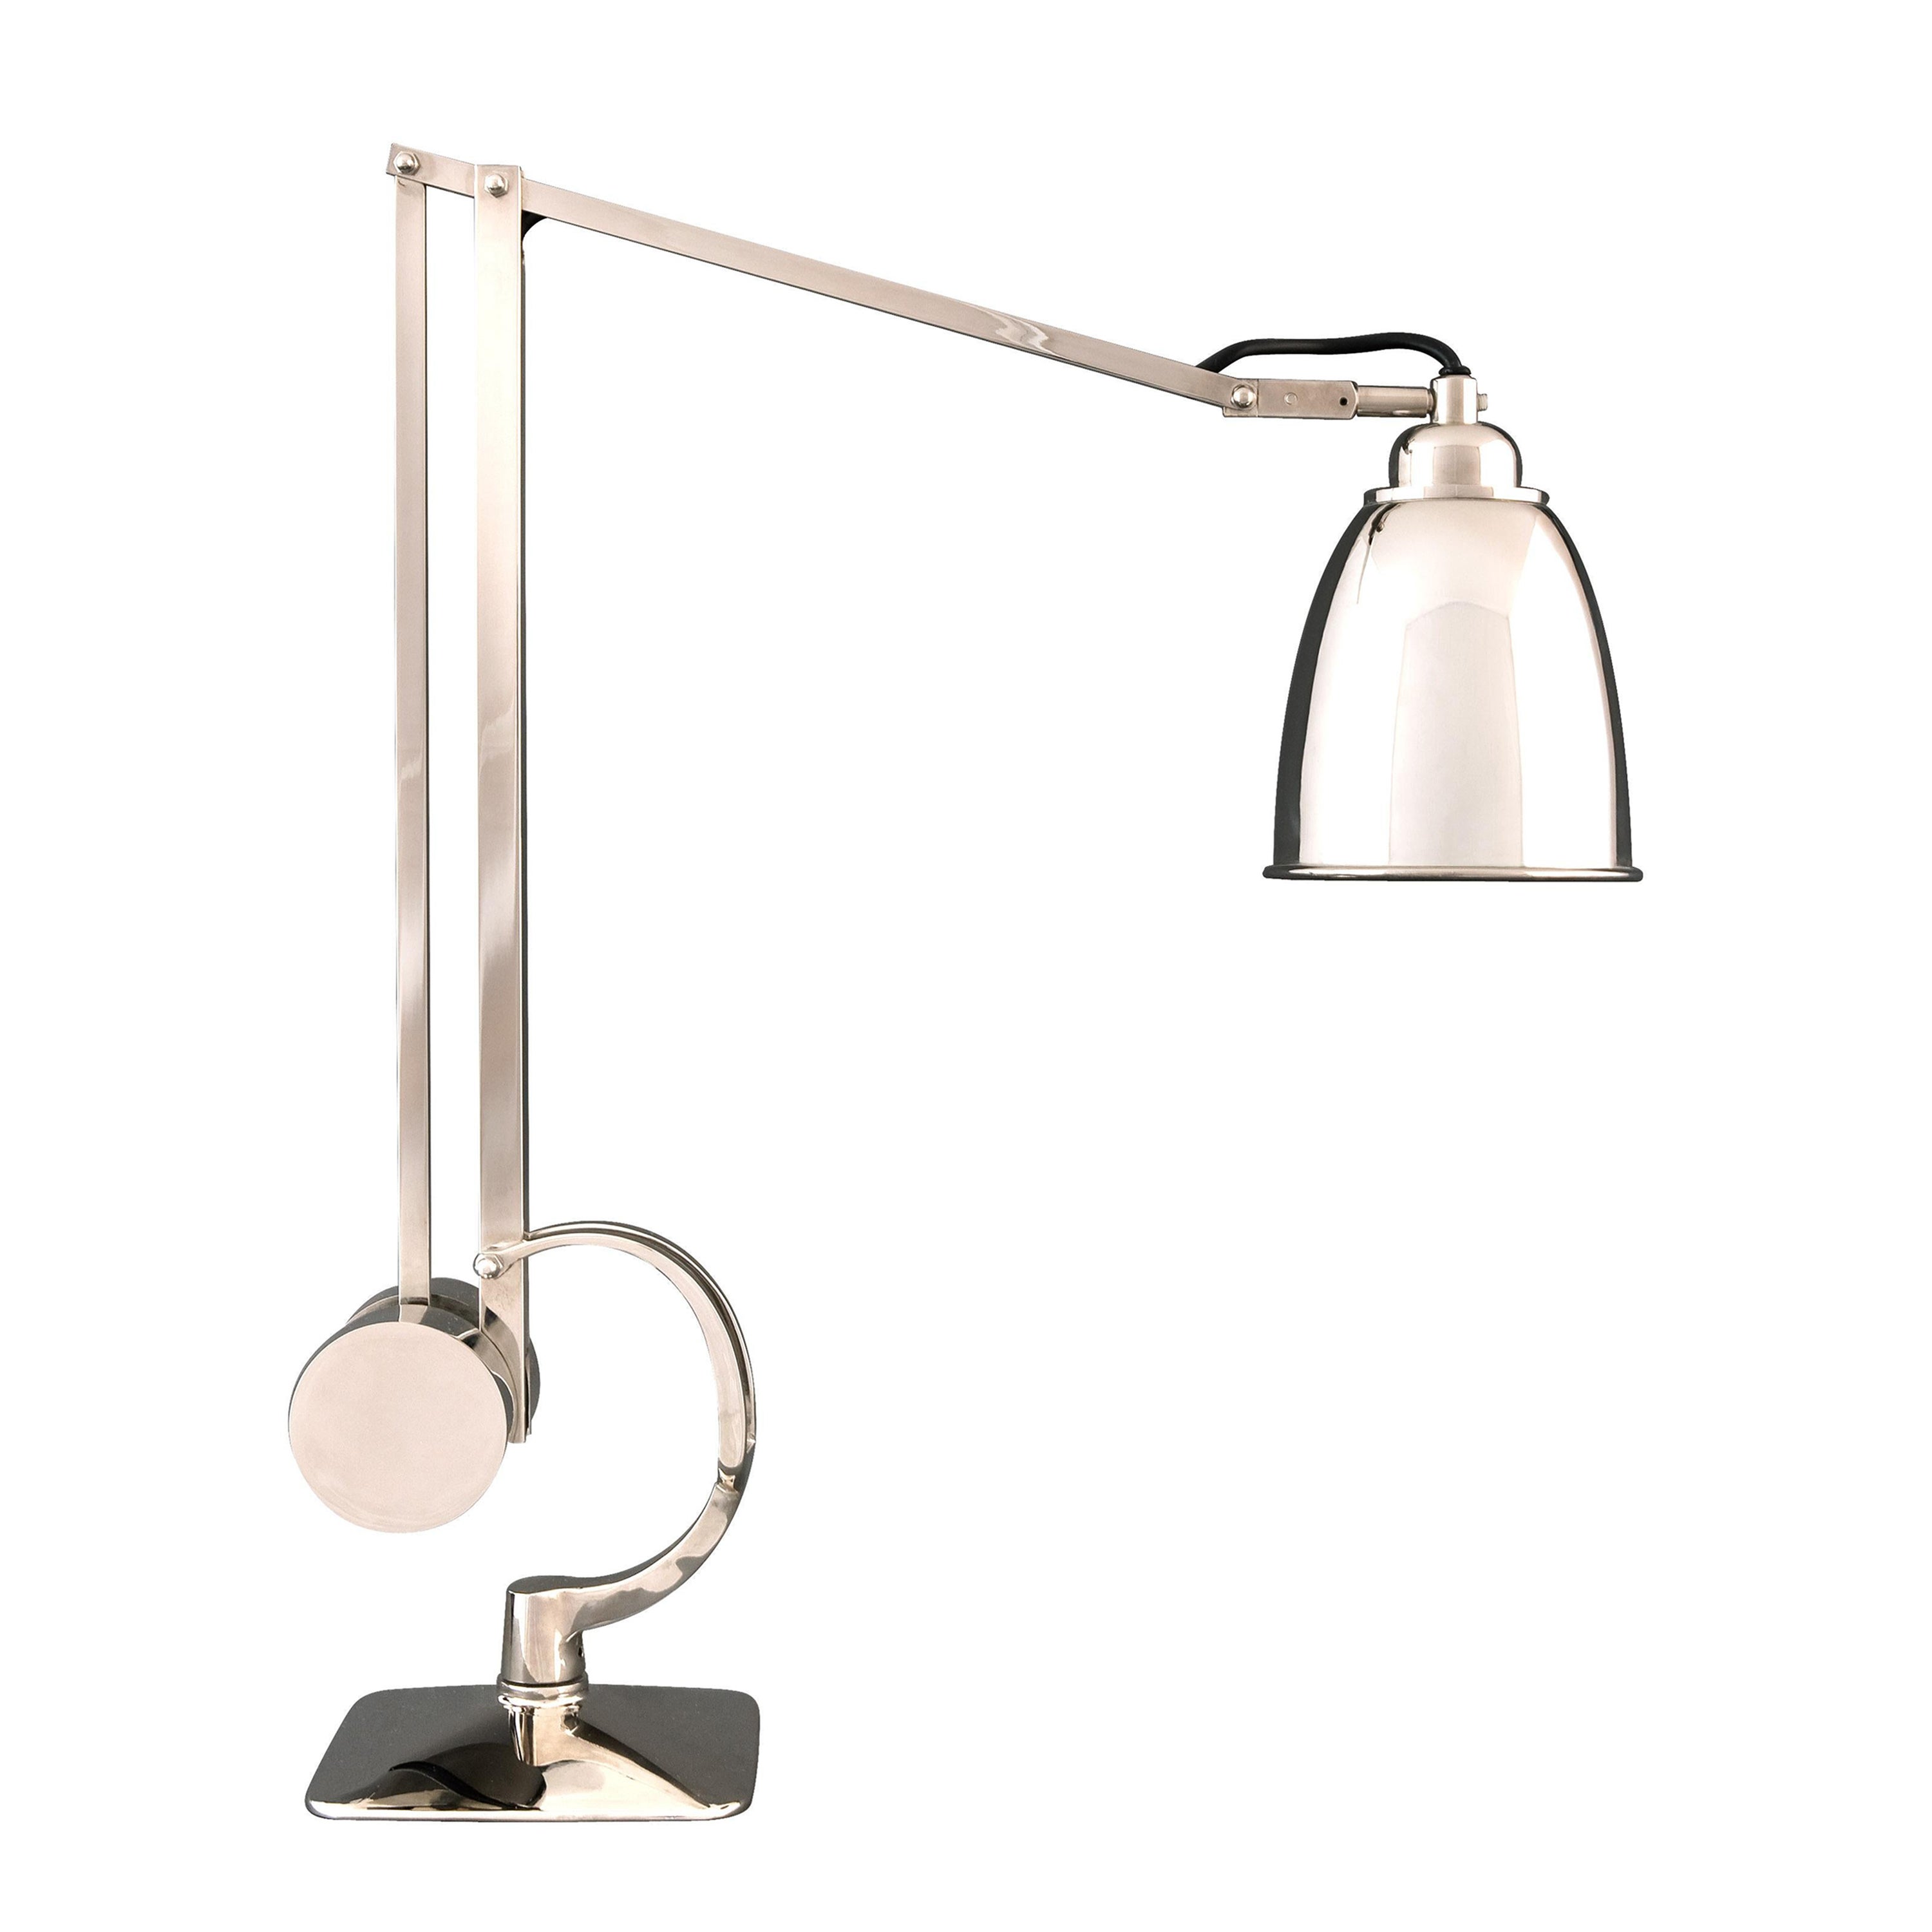 Functional Mid-Century Modern Style Brass Desk Lamp, Re Edition For Sale